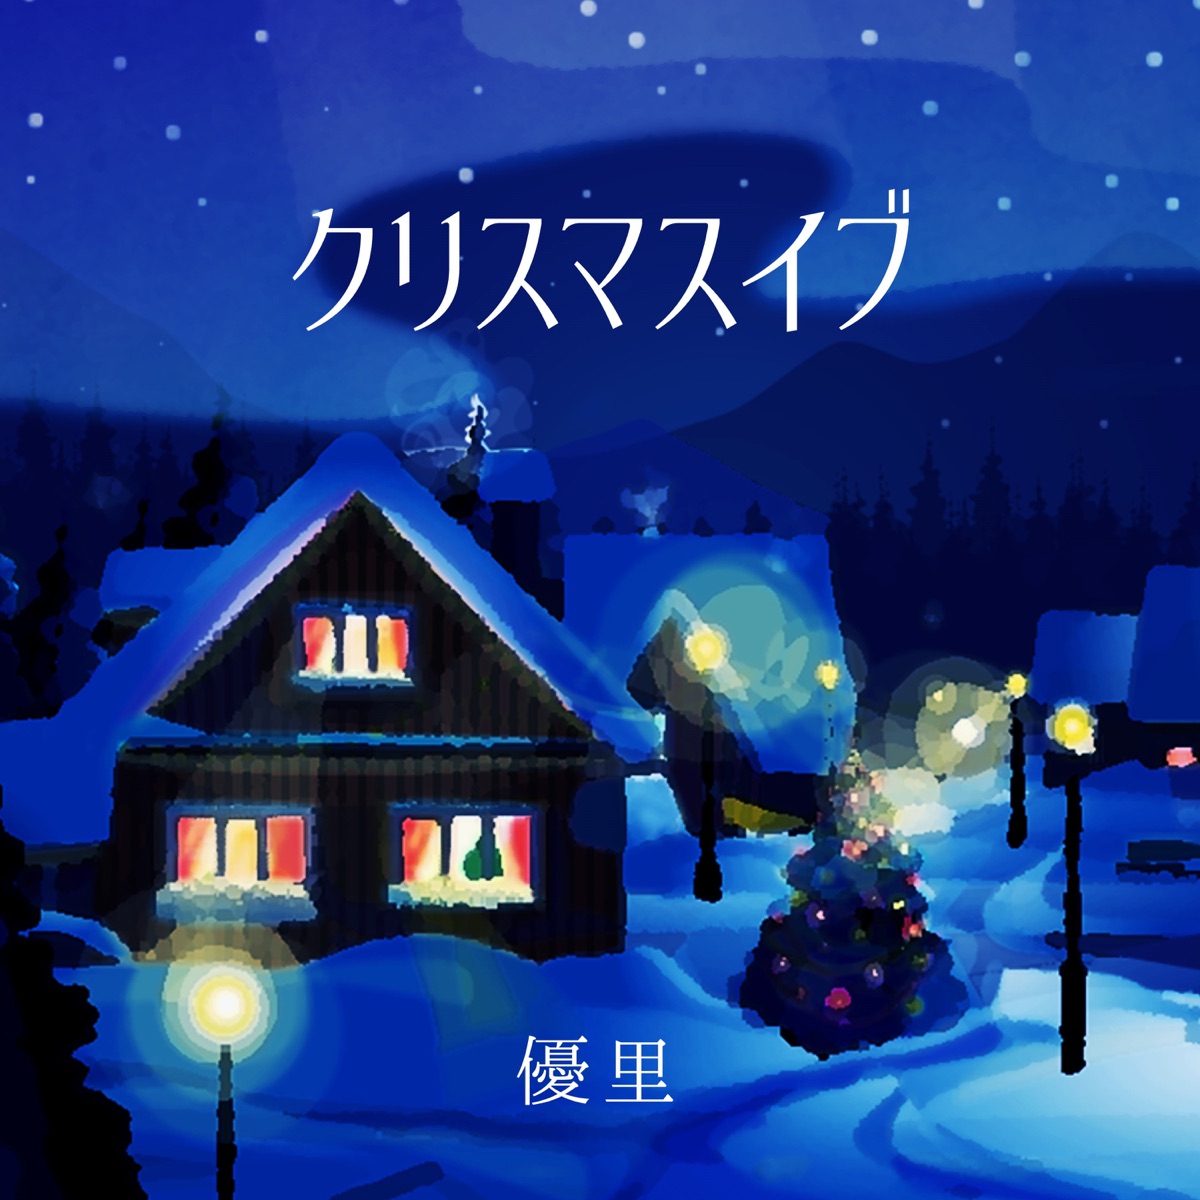 Cover art for『Yuuri - クリスマスイブ』from the release『Christmas Eve